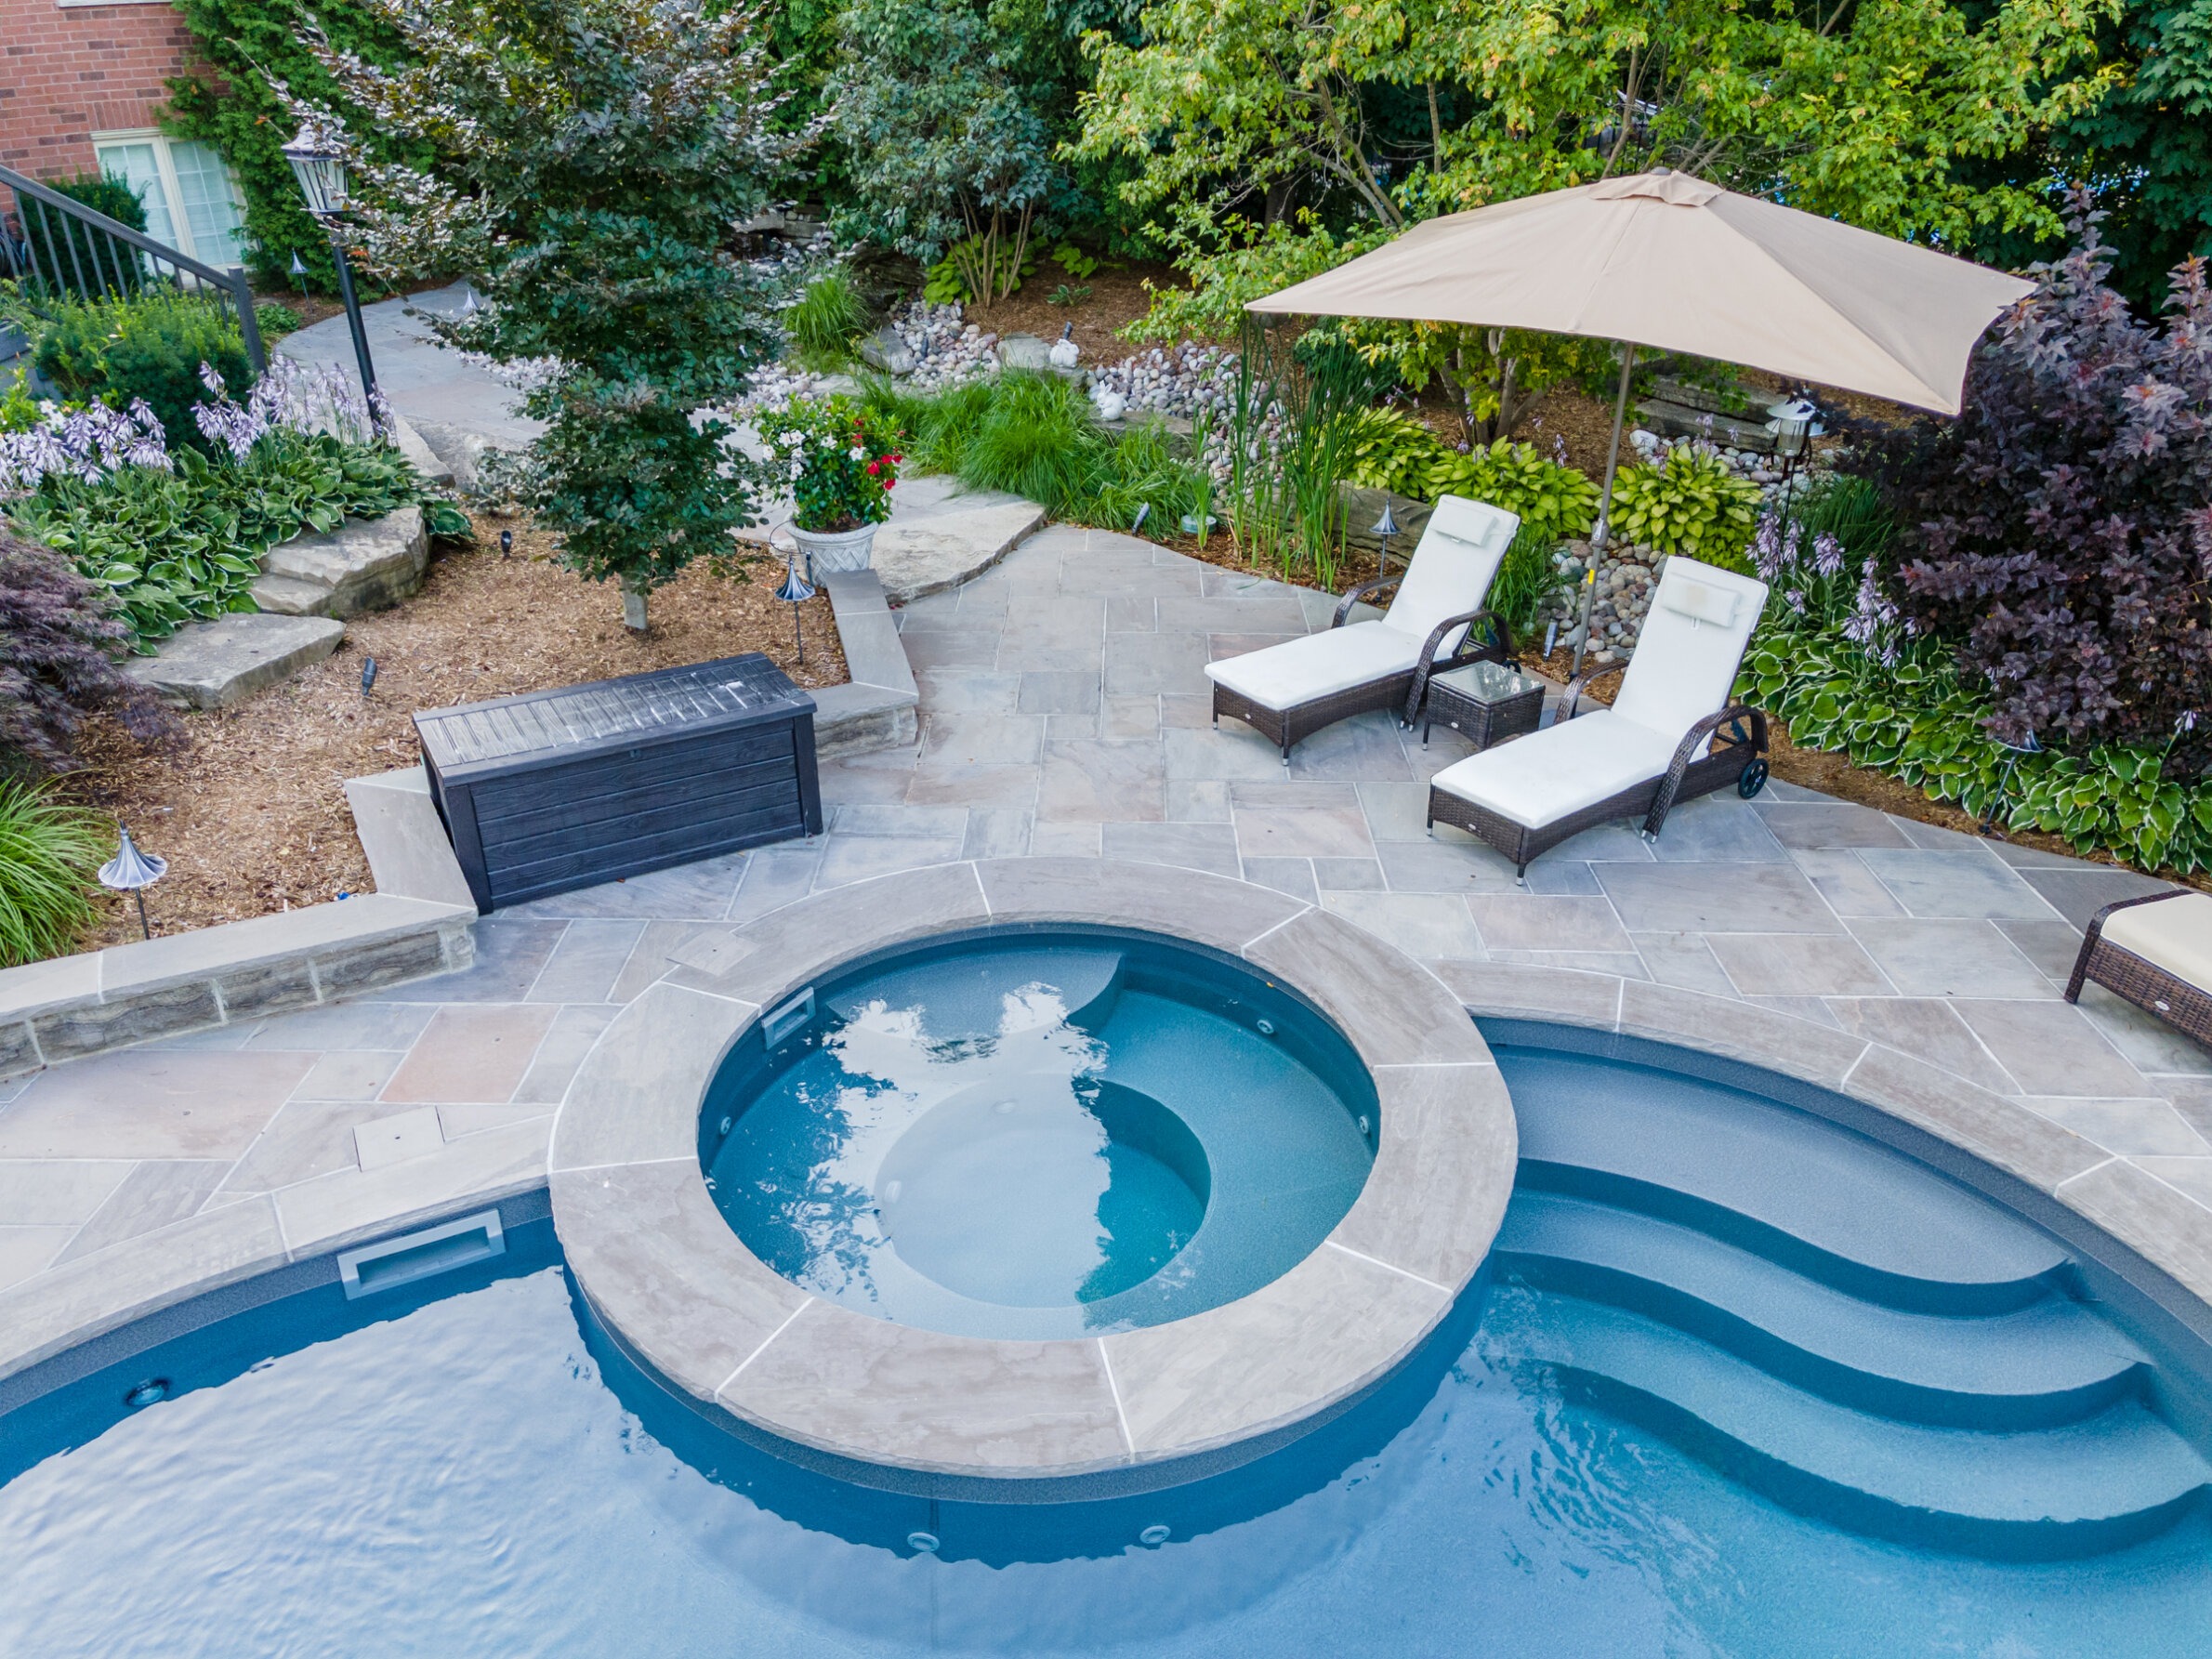 An aerial view of a backyard with a curved pool, hot tub, two lounge chairs under an umbrella, surrounding landscaped garden, and a storage box.